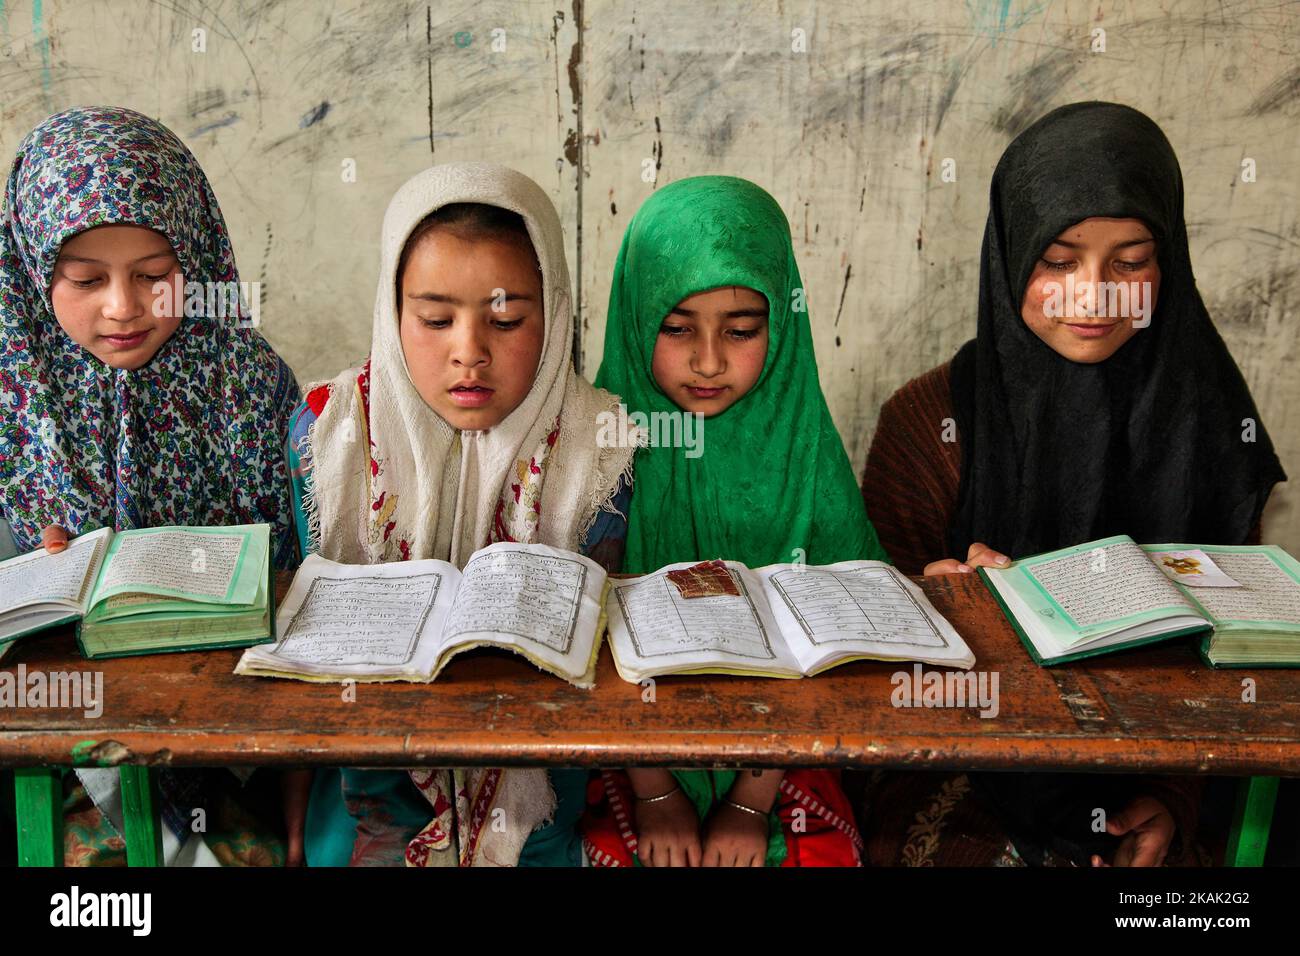 Muslim children study the Quran at a Madrassa (Islamic religious school) in a small village near the town of Kargil in Ladakh, Jammu and Kashmir, India on June 25, 2014. (This image has a signed model release). (Photo by Creative Touch Imaging Ltd./NurPhoto) *** Please Use Credit from Credit Field *** Stock Photo